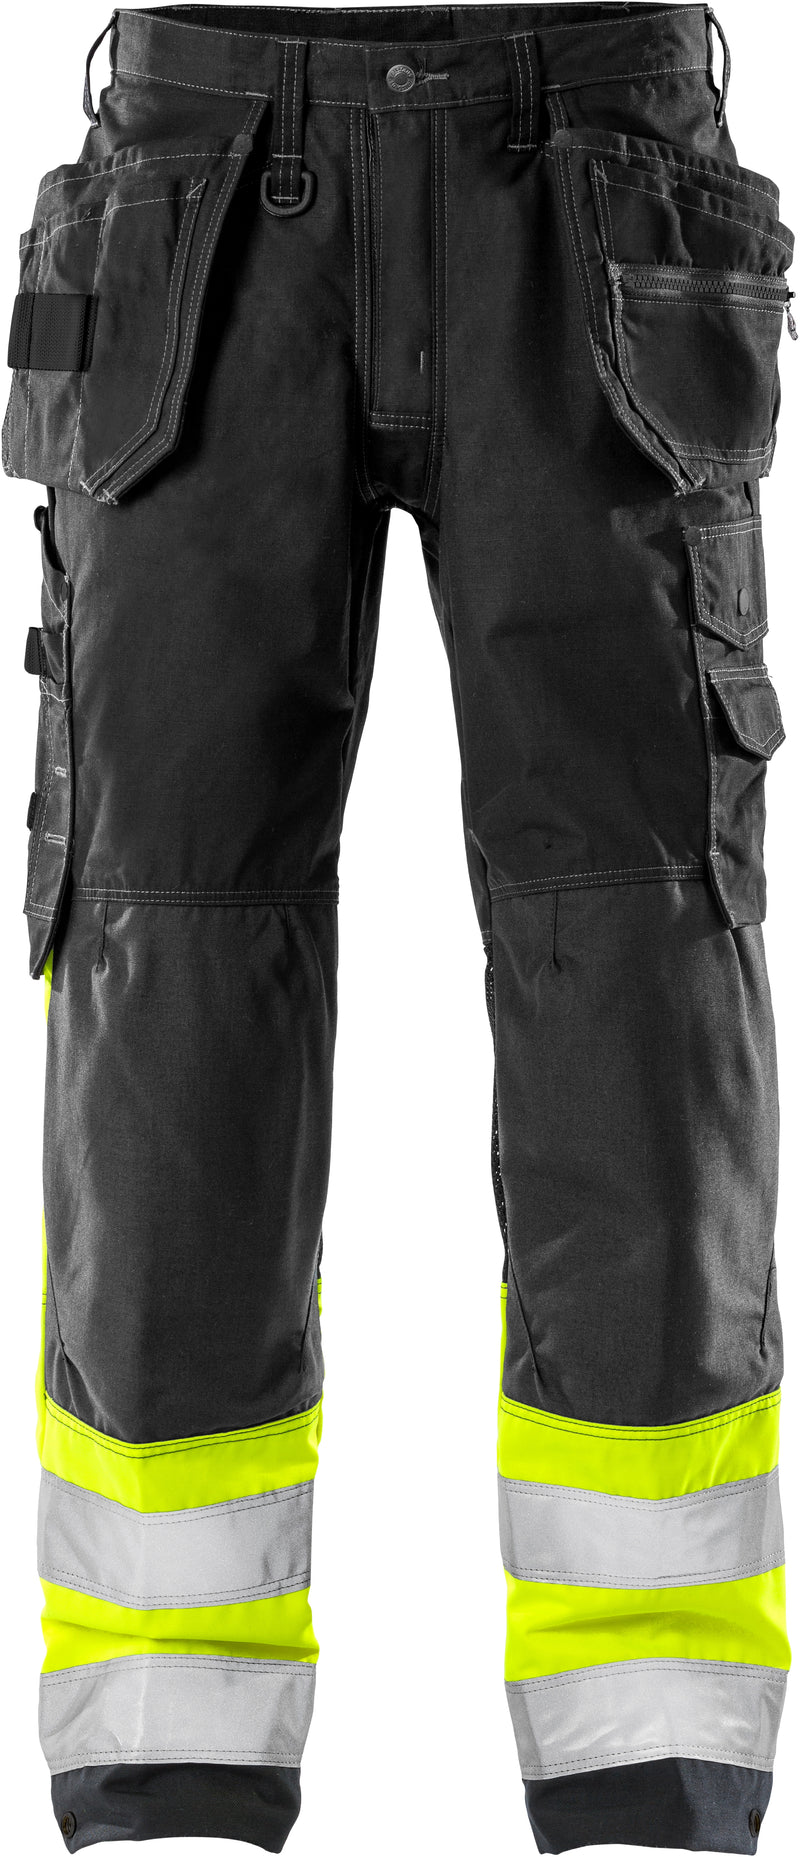 Load image into Gallery viewer, Trousers FRISTADS HIGH VIS CRAFTSMAN TROUSERS CLASS 1 2093 NYC
